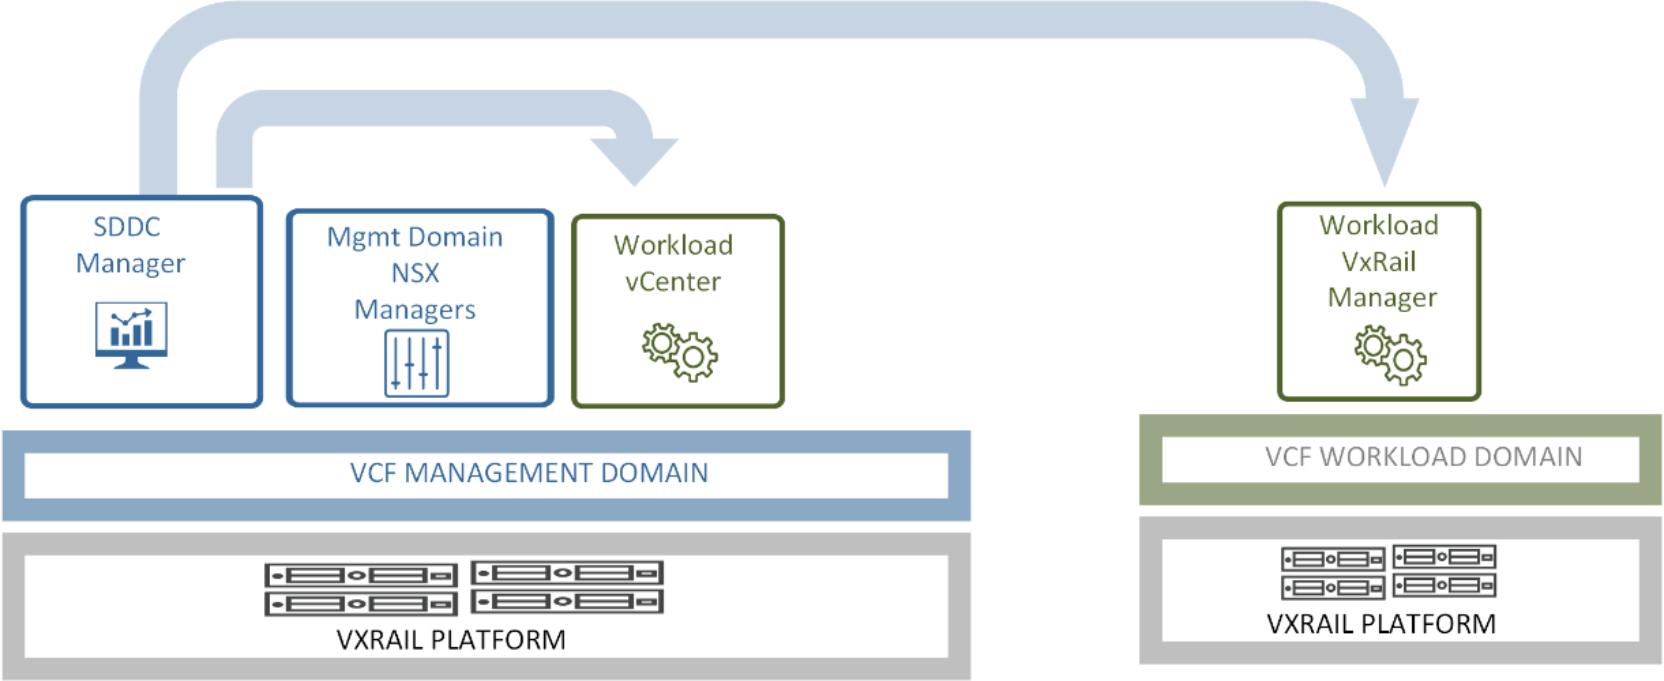 This figure shows the VI workload domain being deployed using existing NSX managers.